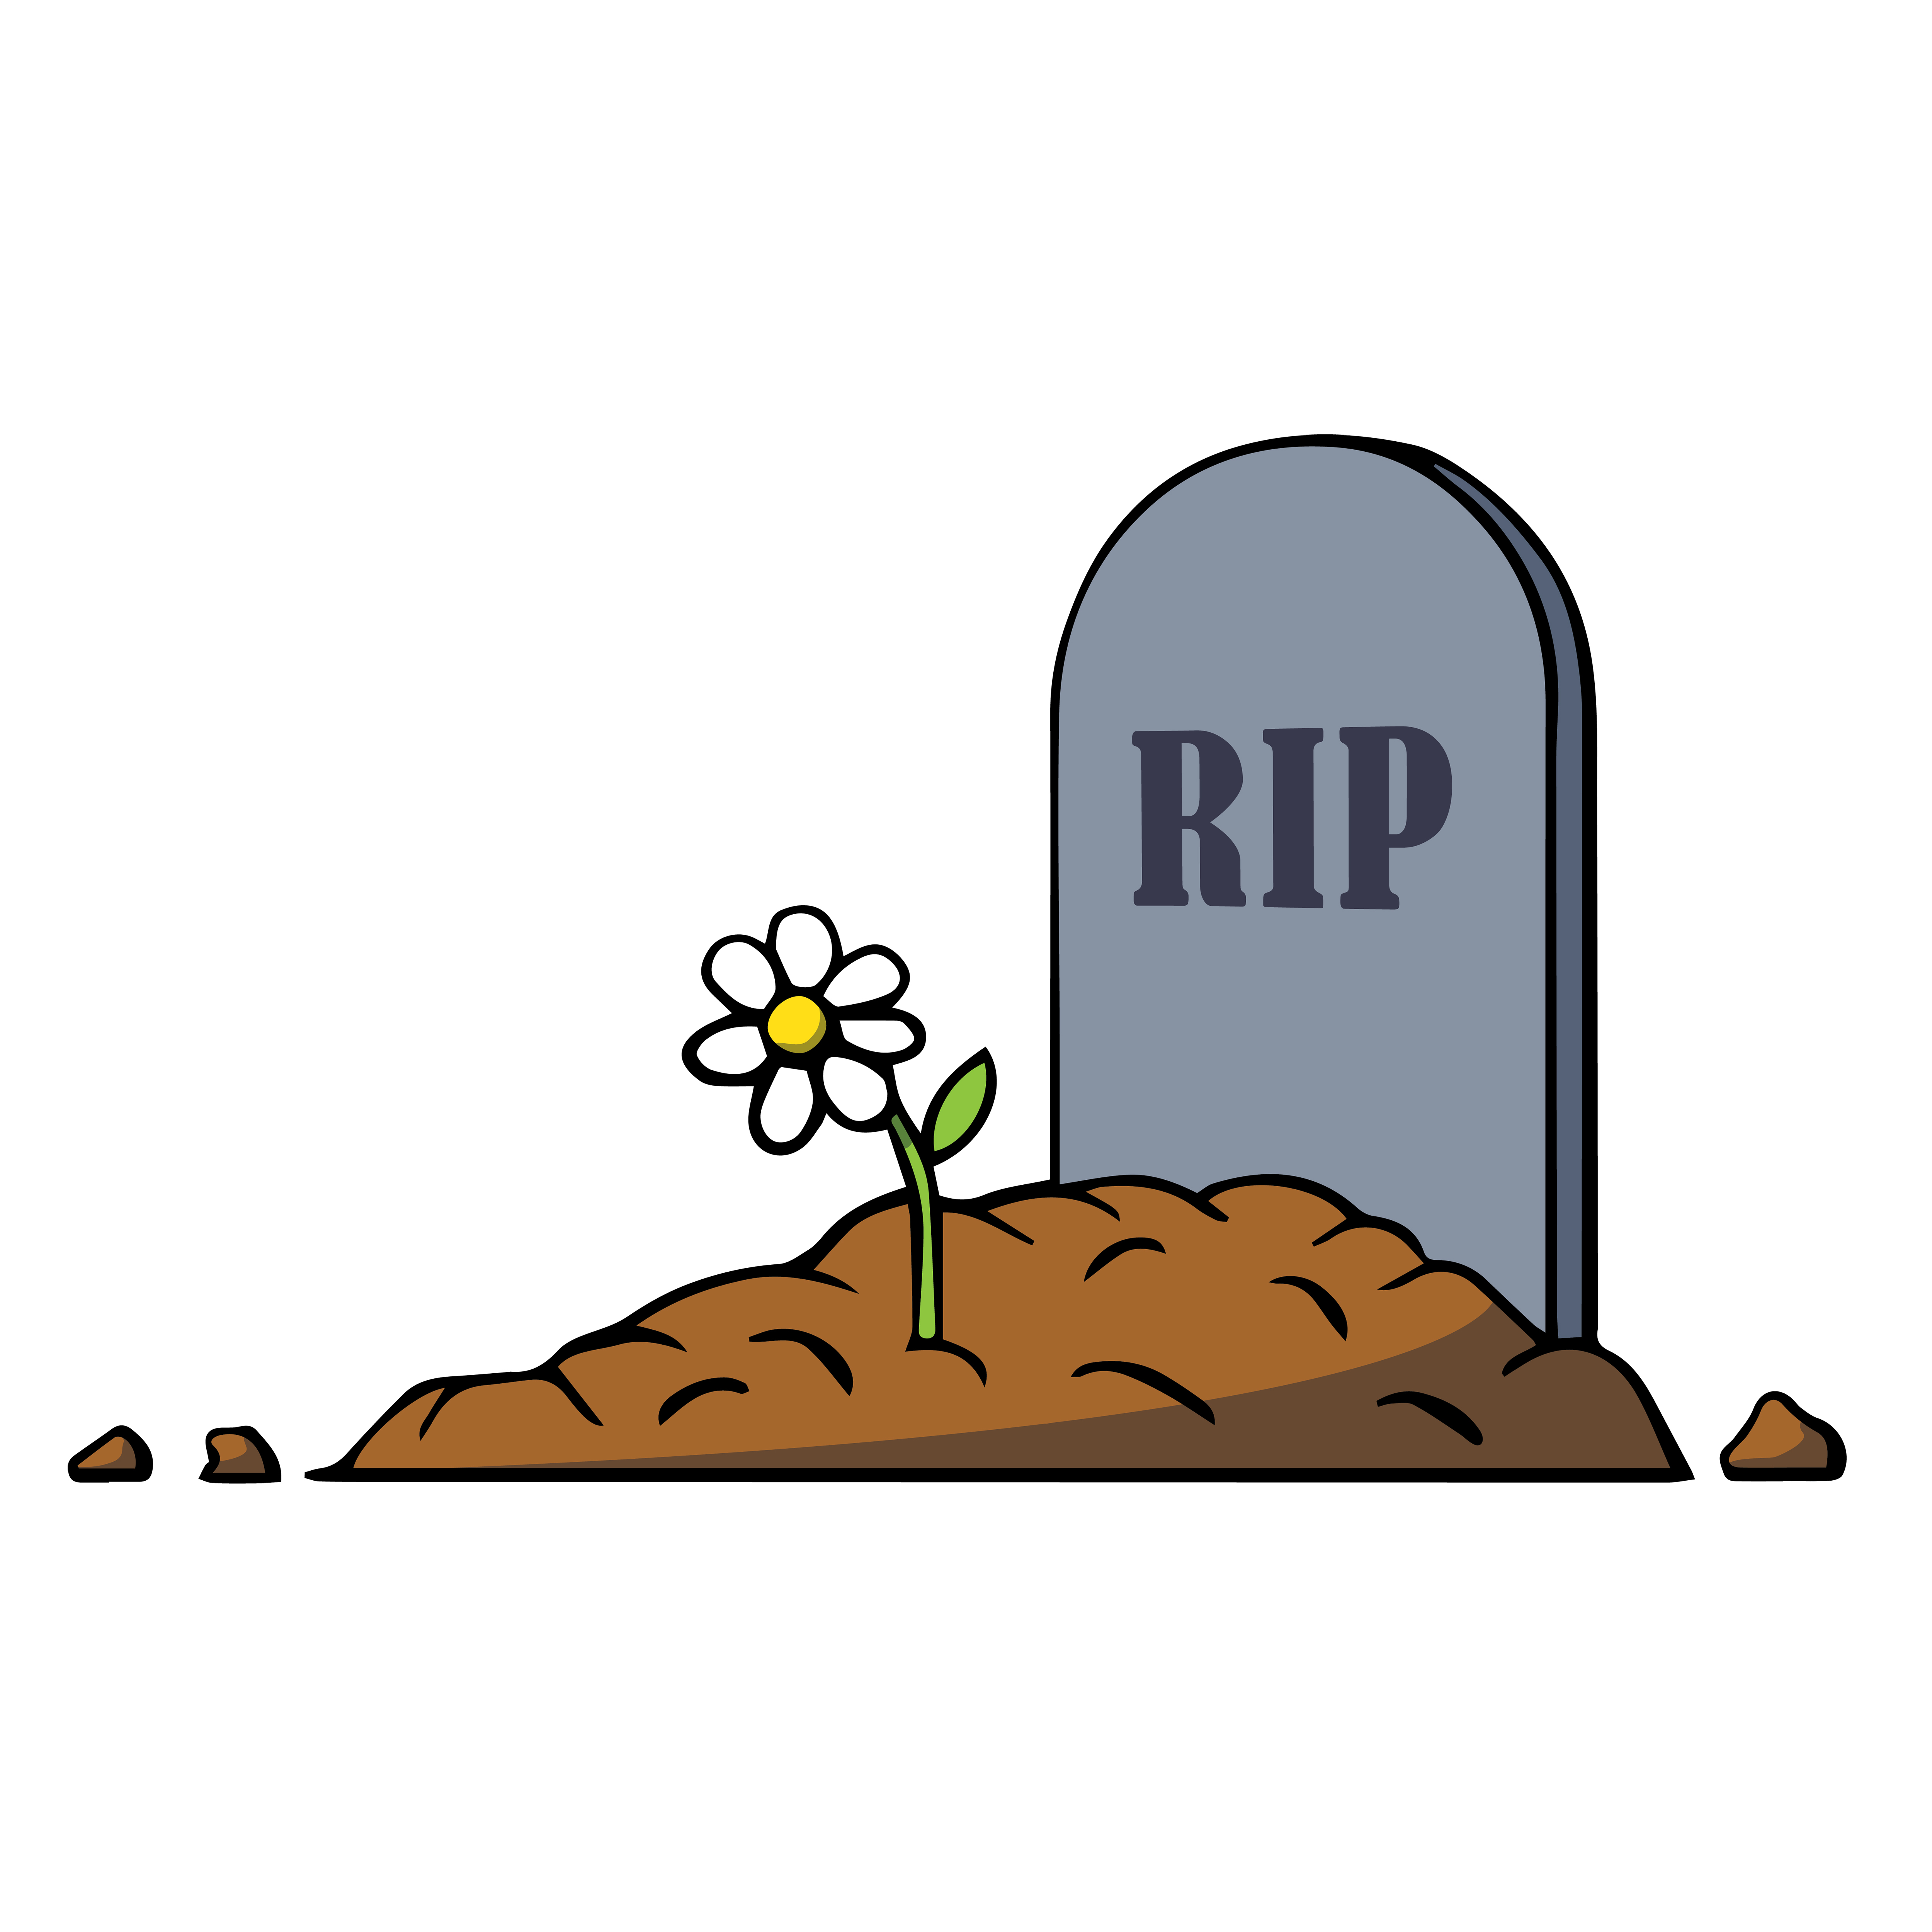 Rip clipart - Clipground